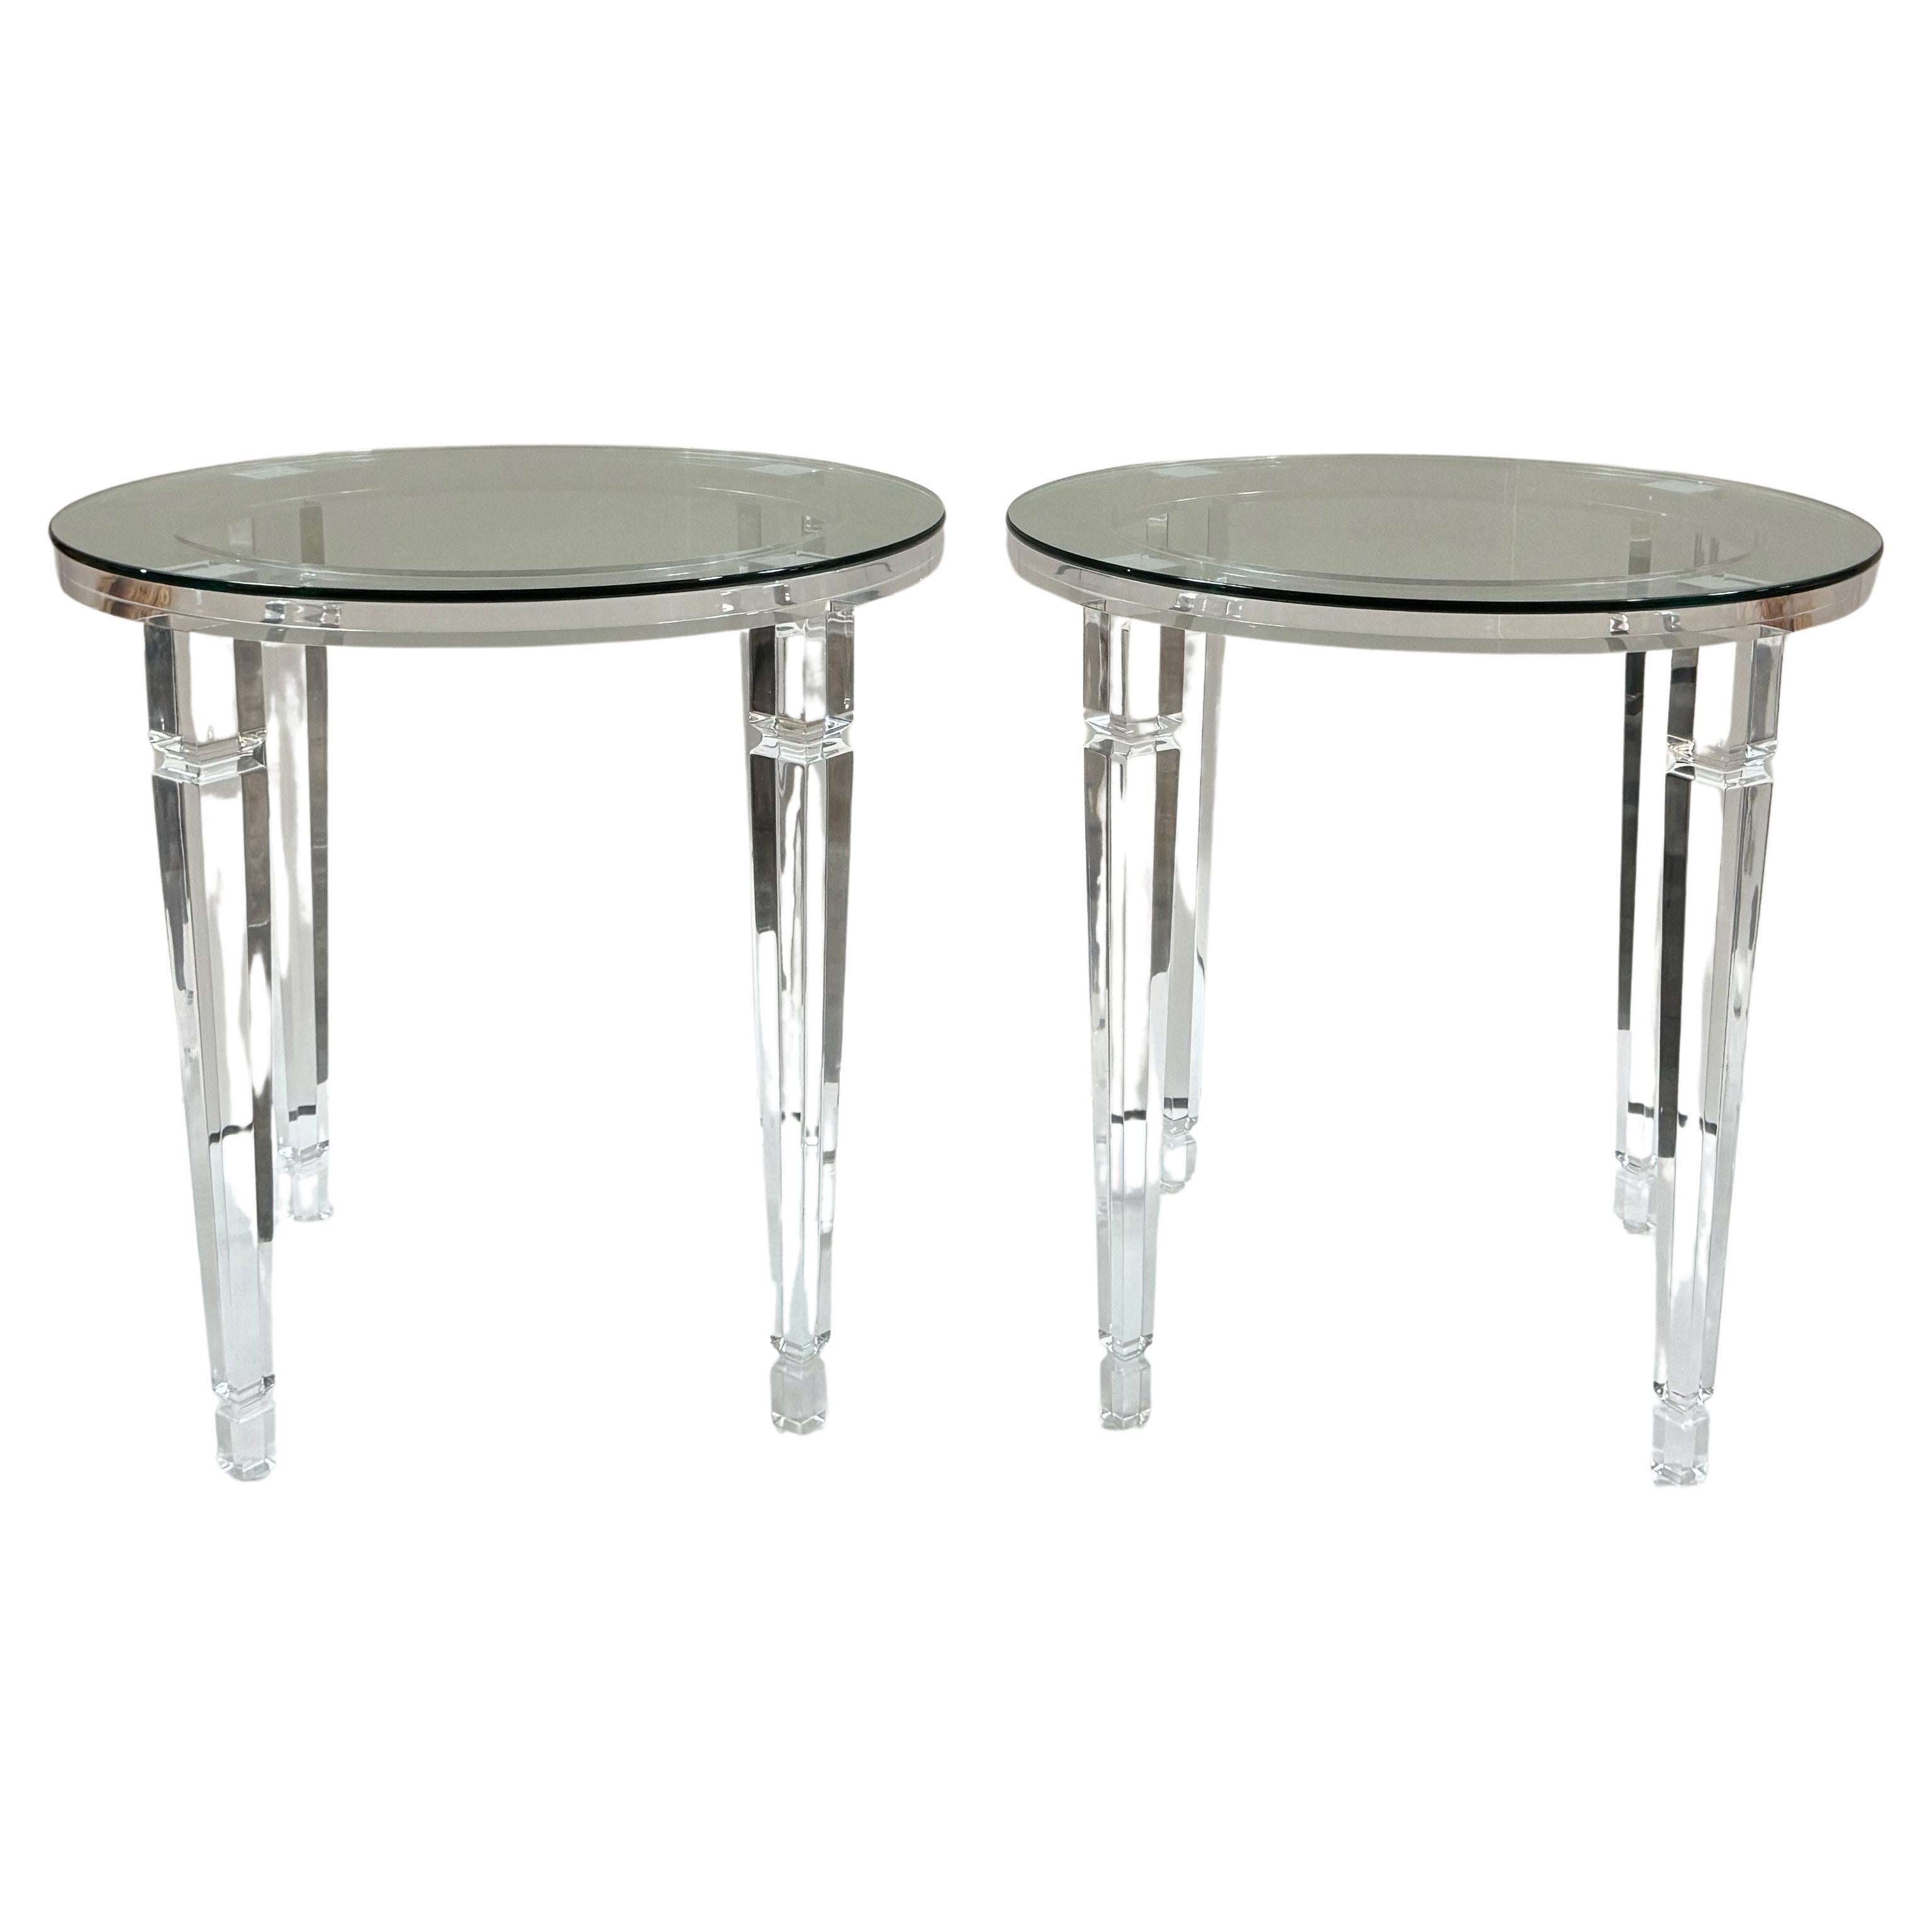 2 Richard Round Acrylic End Table For Sale